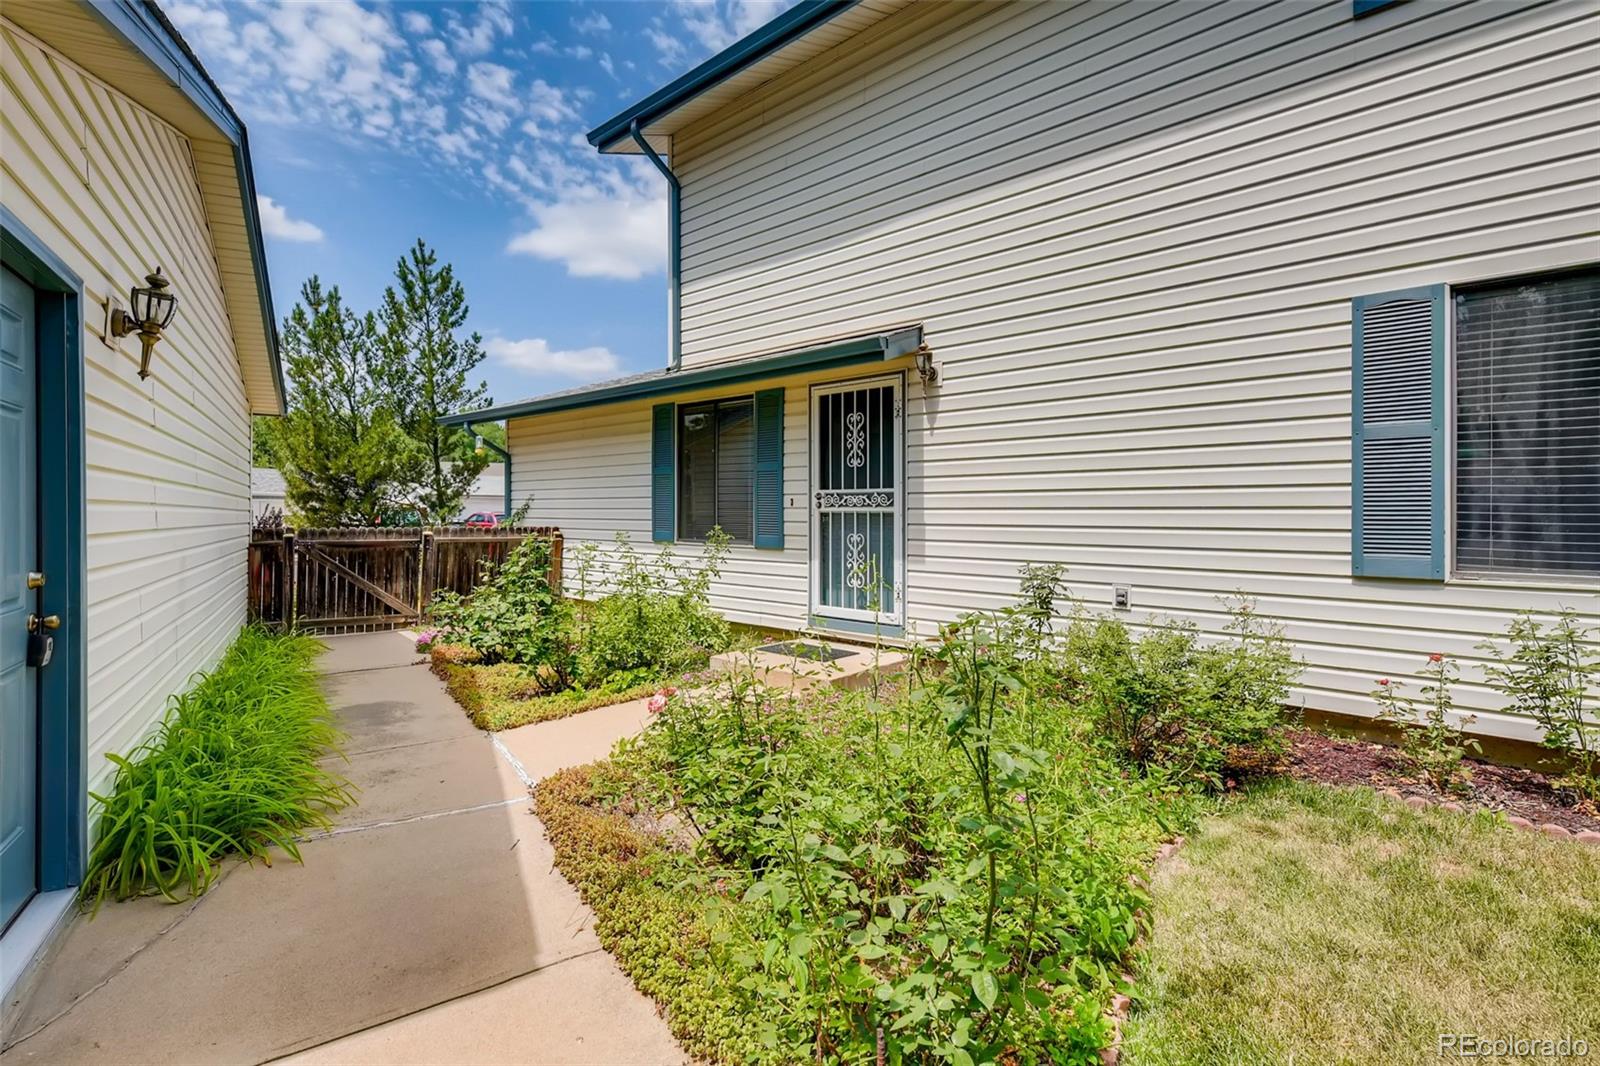 6321 95th, Westminster, CO